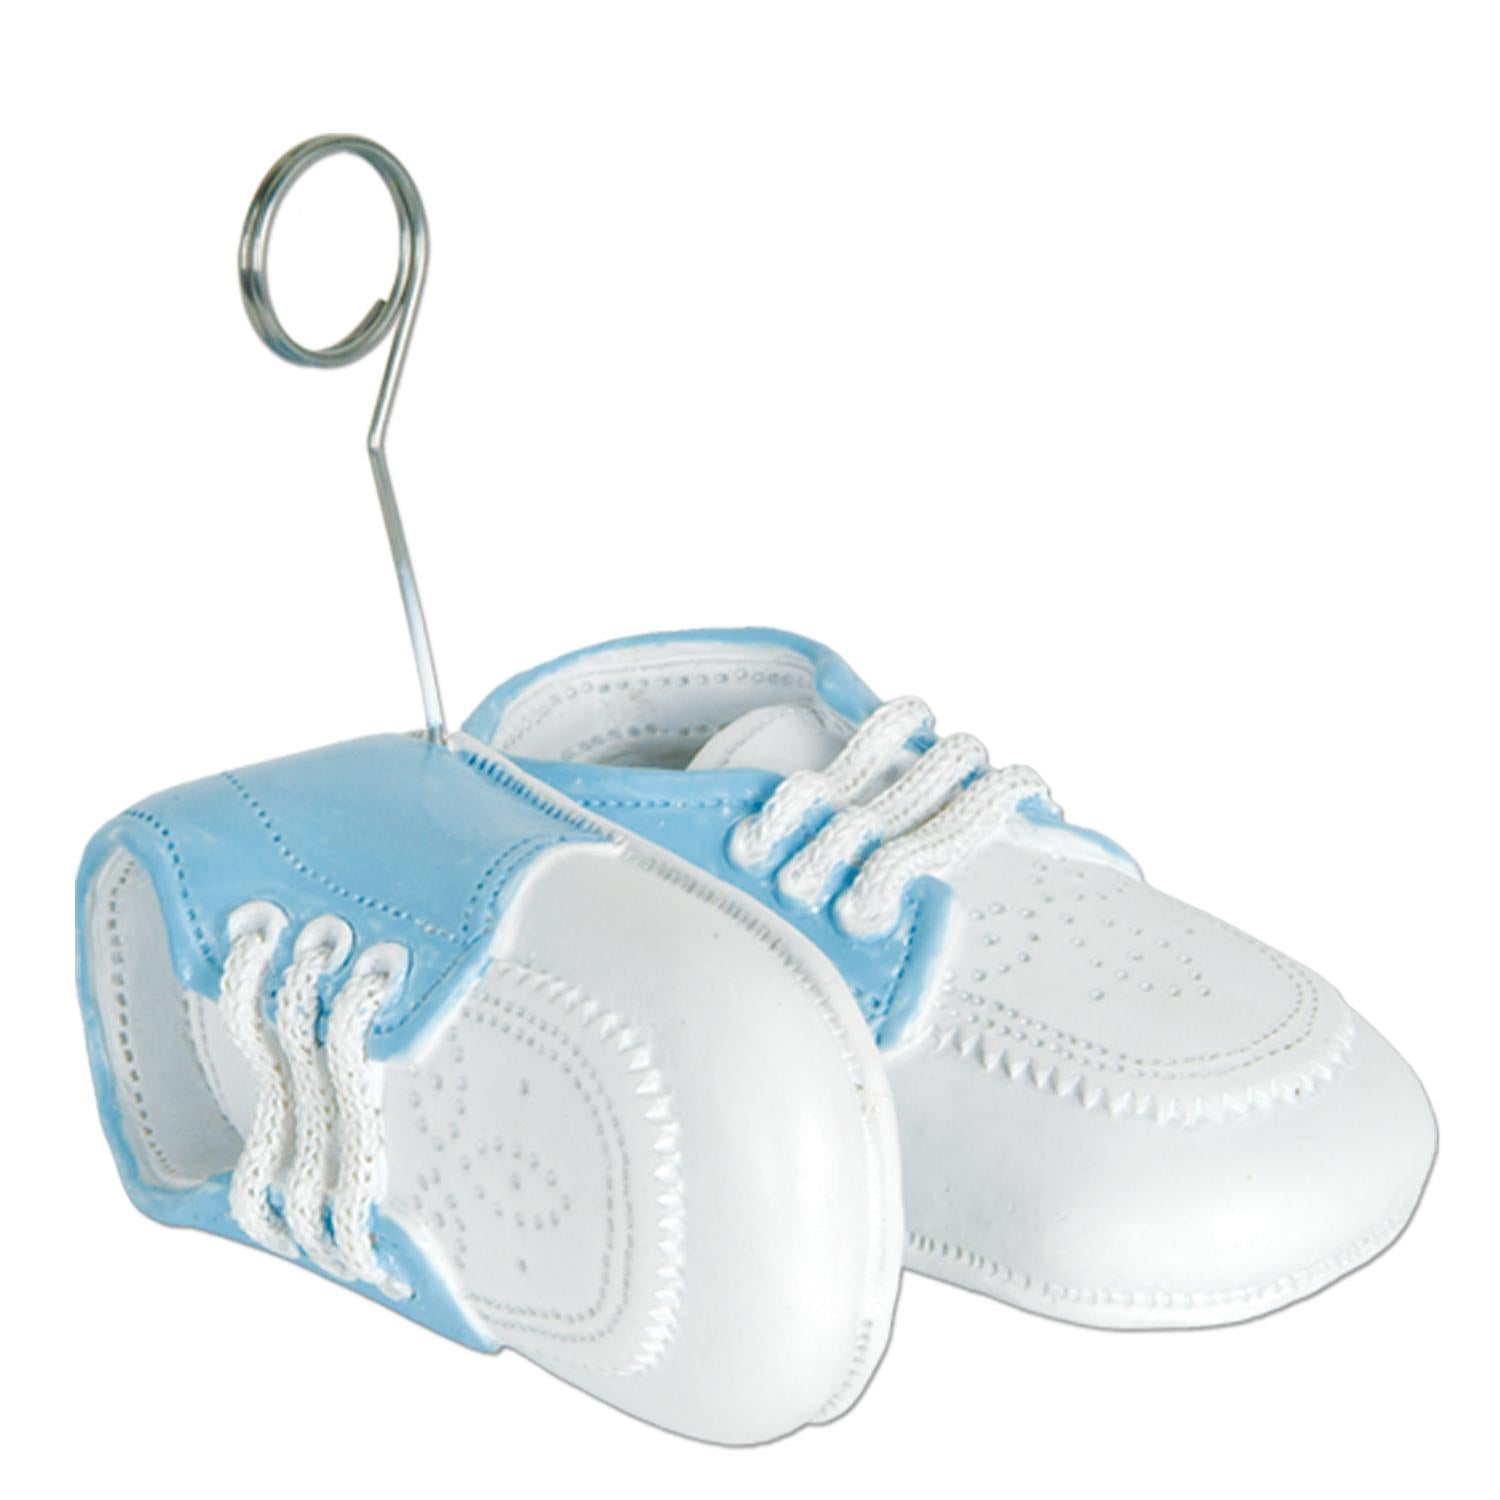 Baby Shoes Photo/Balloon Holder - white with lt blue upper